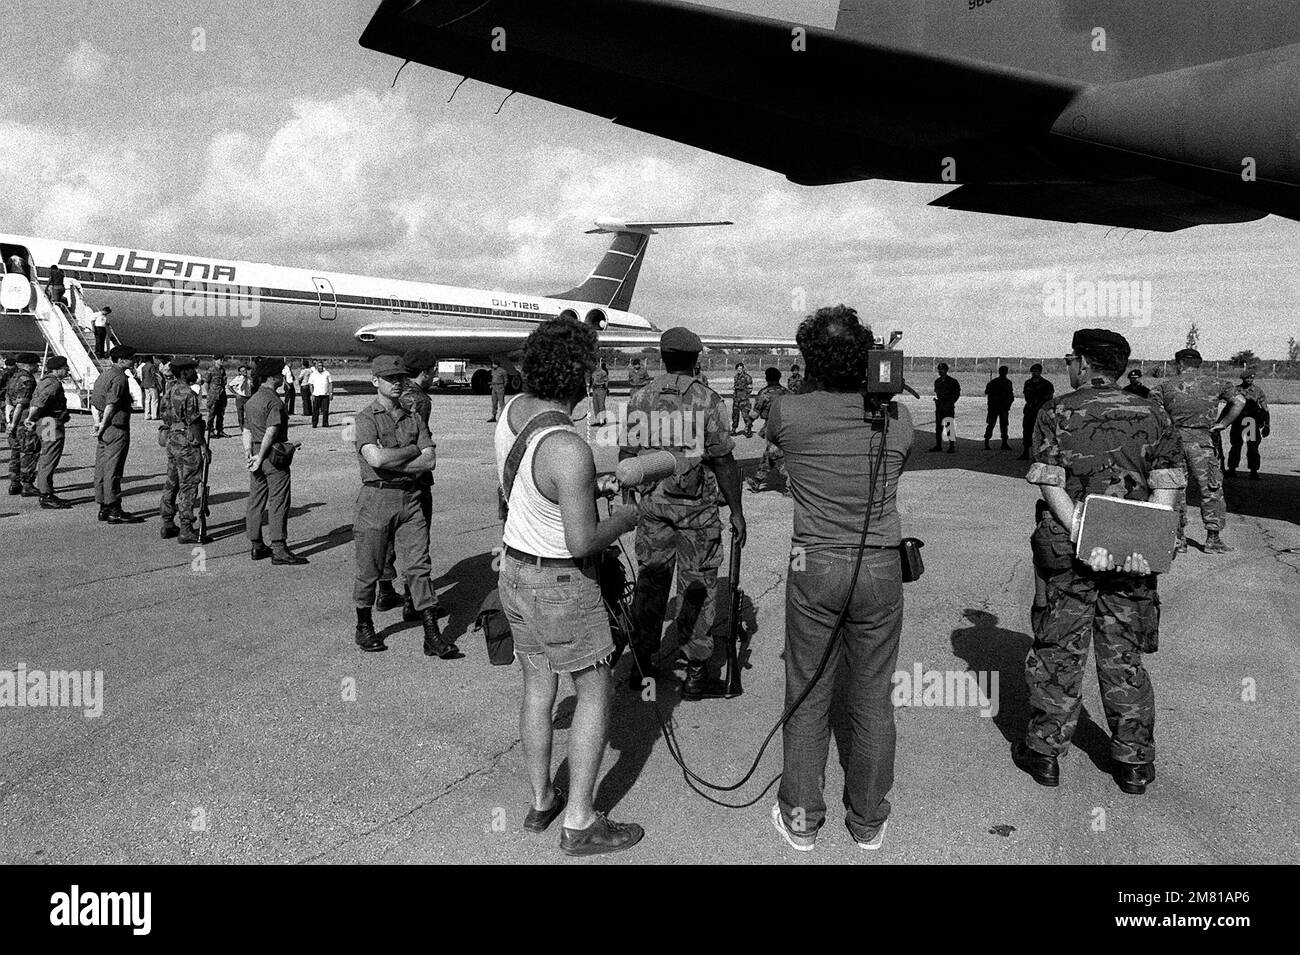 U.S. Air Force security police stand guard as Cuban nationals are transferred from a C-130 Hercules aircraft to a I1-62M airliner. They are being returned to Cuba after being captured on Grenada during the multiservice, multinational Operation Urgent Fury. He is being transferred from the C-130 Hercules aircraft to a Cuban airliner that will return him to Cuba. Subject Operation/Series: URGENT FURY Base: Seawell International Airport Country: Bangladesh (BGD) Stock Photo